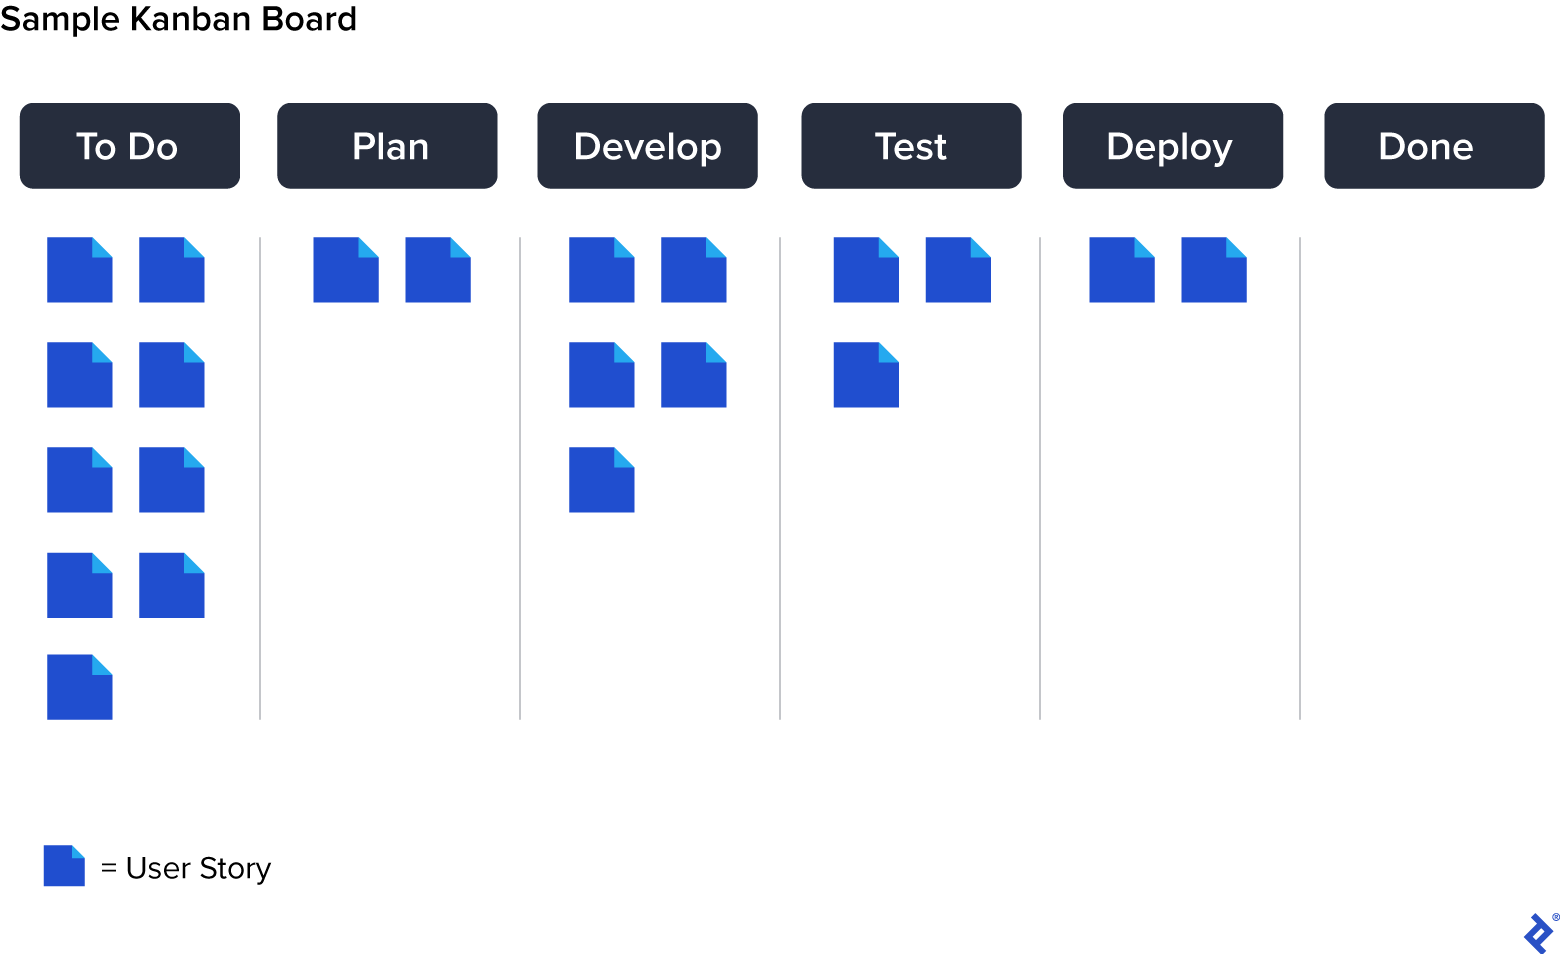 A sample Kanban board: Columns depict development phases of work items as they advance across the board